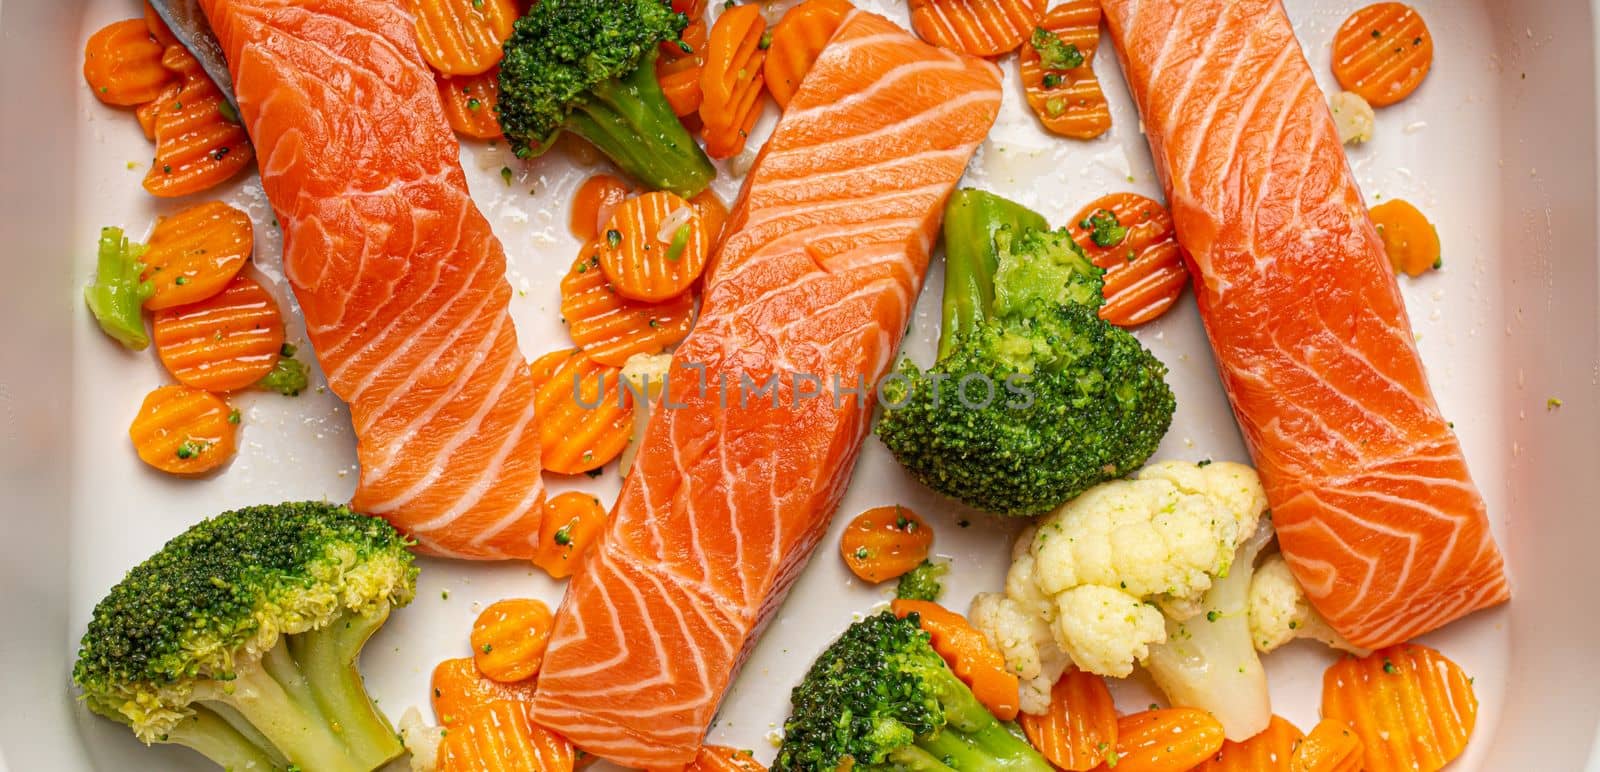 Top view of baking dish casserole with raw uncooked fish salmon steaks, broccoli, cauliflower, carrot. Preparing a healthy dinner concept by its_al_dente